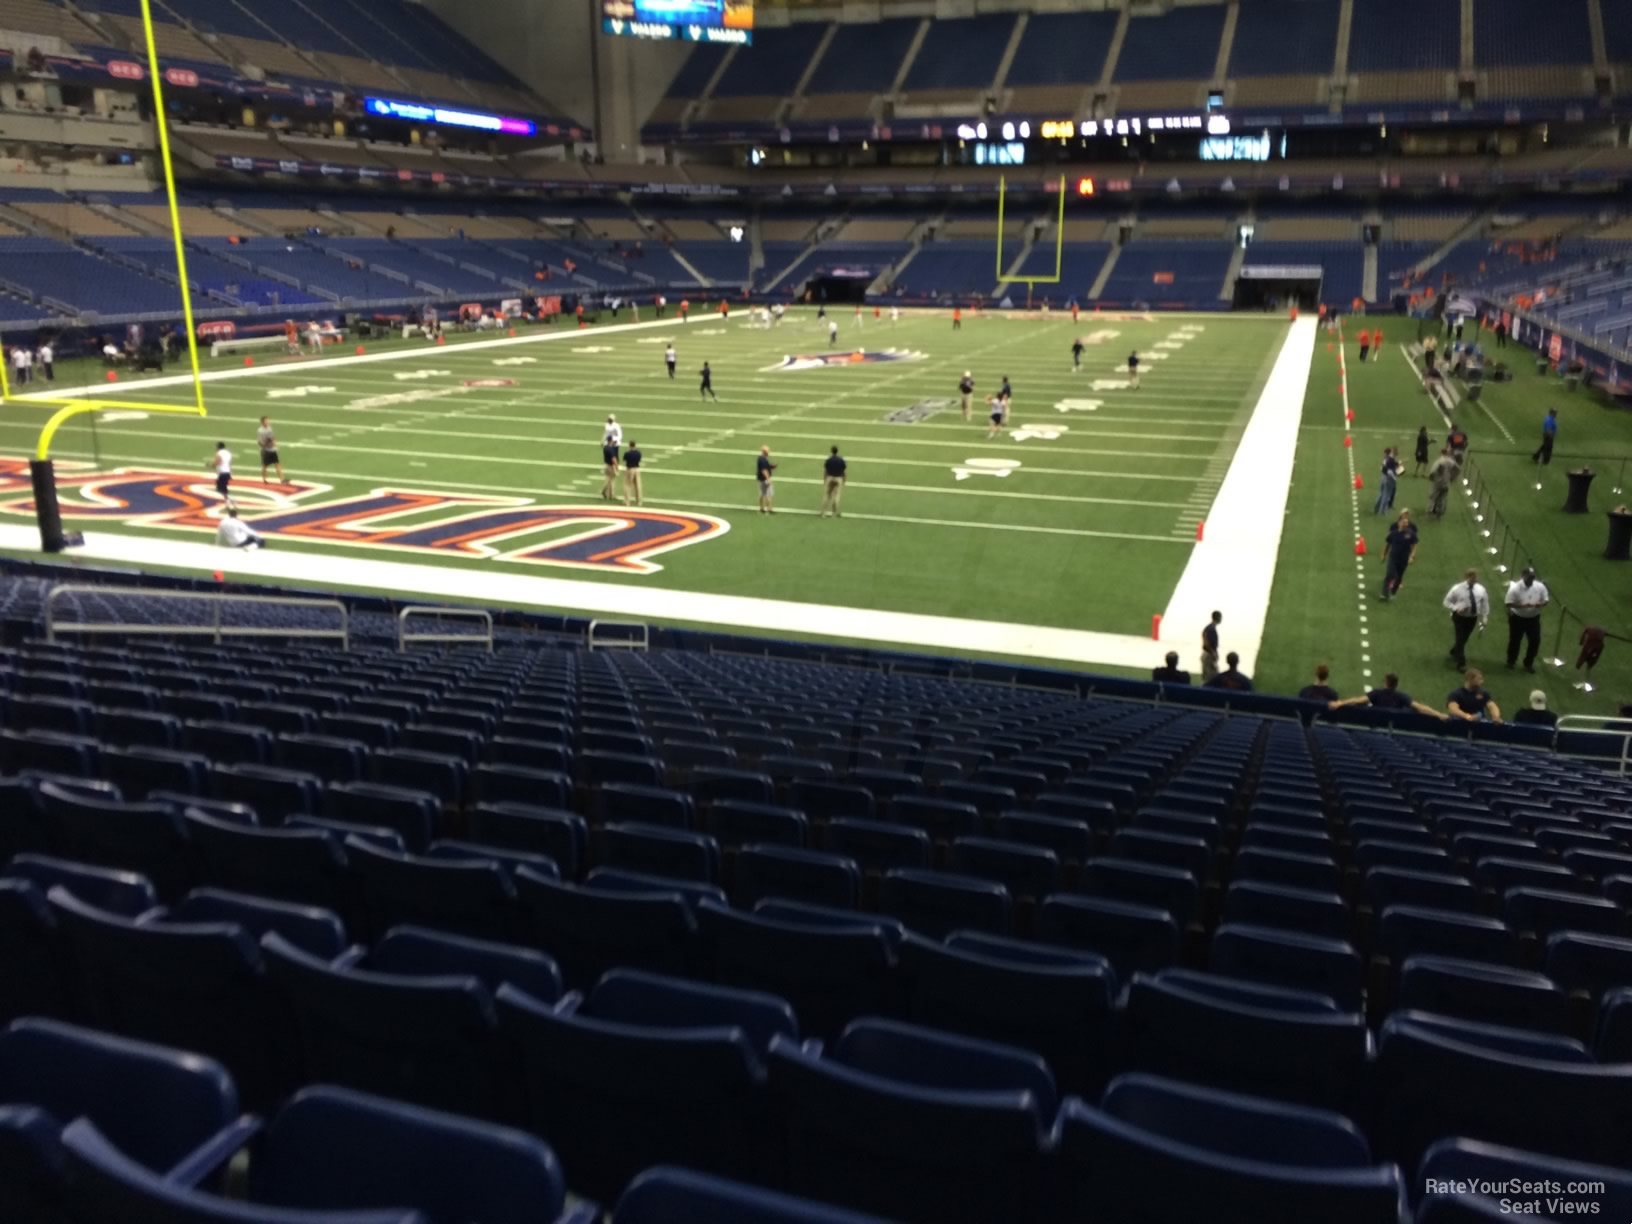 section 143, row 18 seat view  for football - alamodome